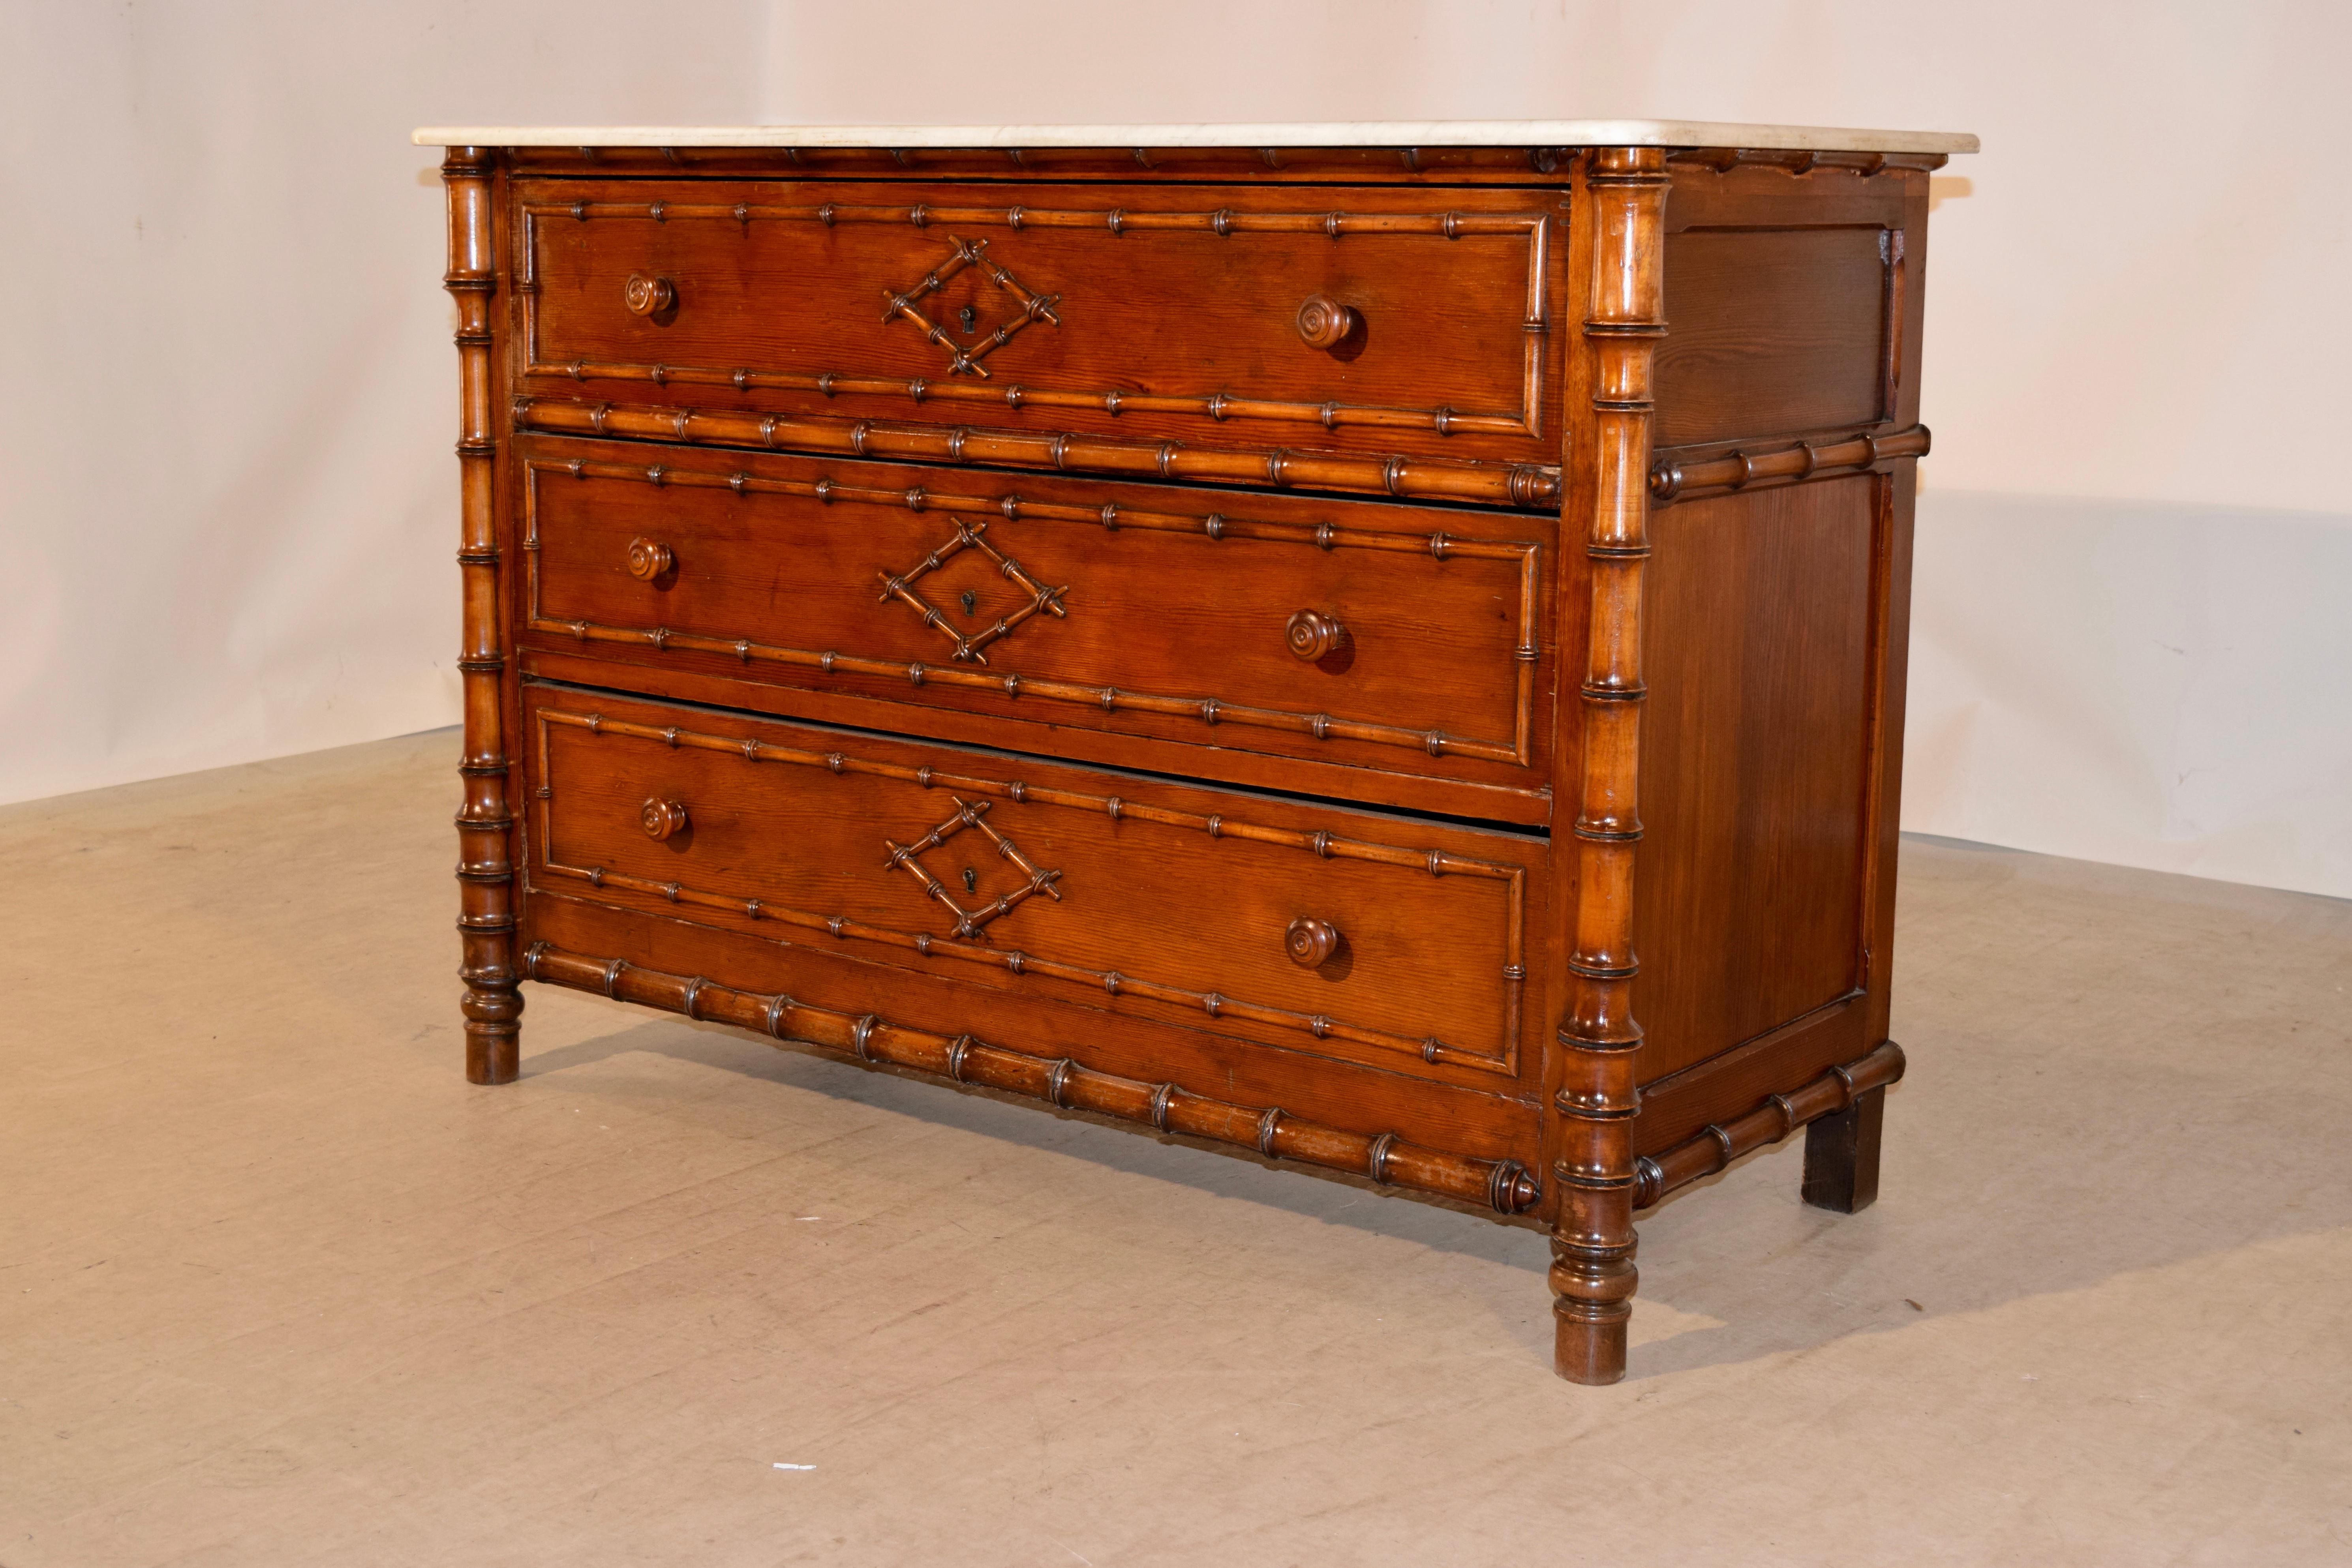 19th century French faux bamboo chest of drawers made from cherry. The top is made of the original marble and retains some staining from age and use. The case is wonderfully detailed with hand panelled sides, banded with faux bamboo molding and